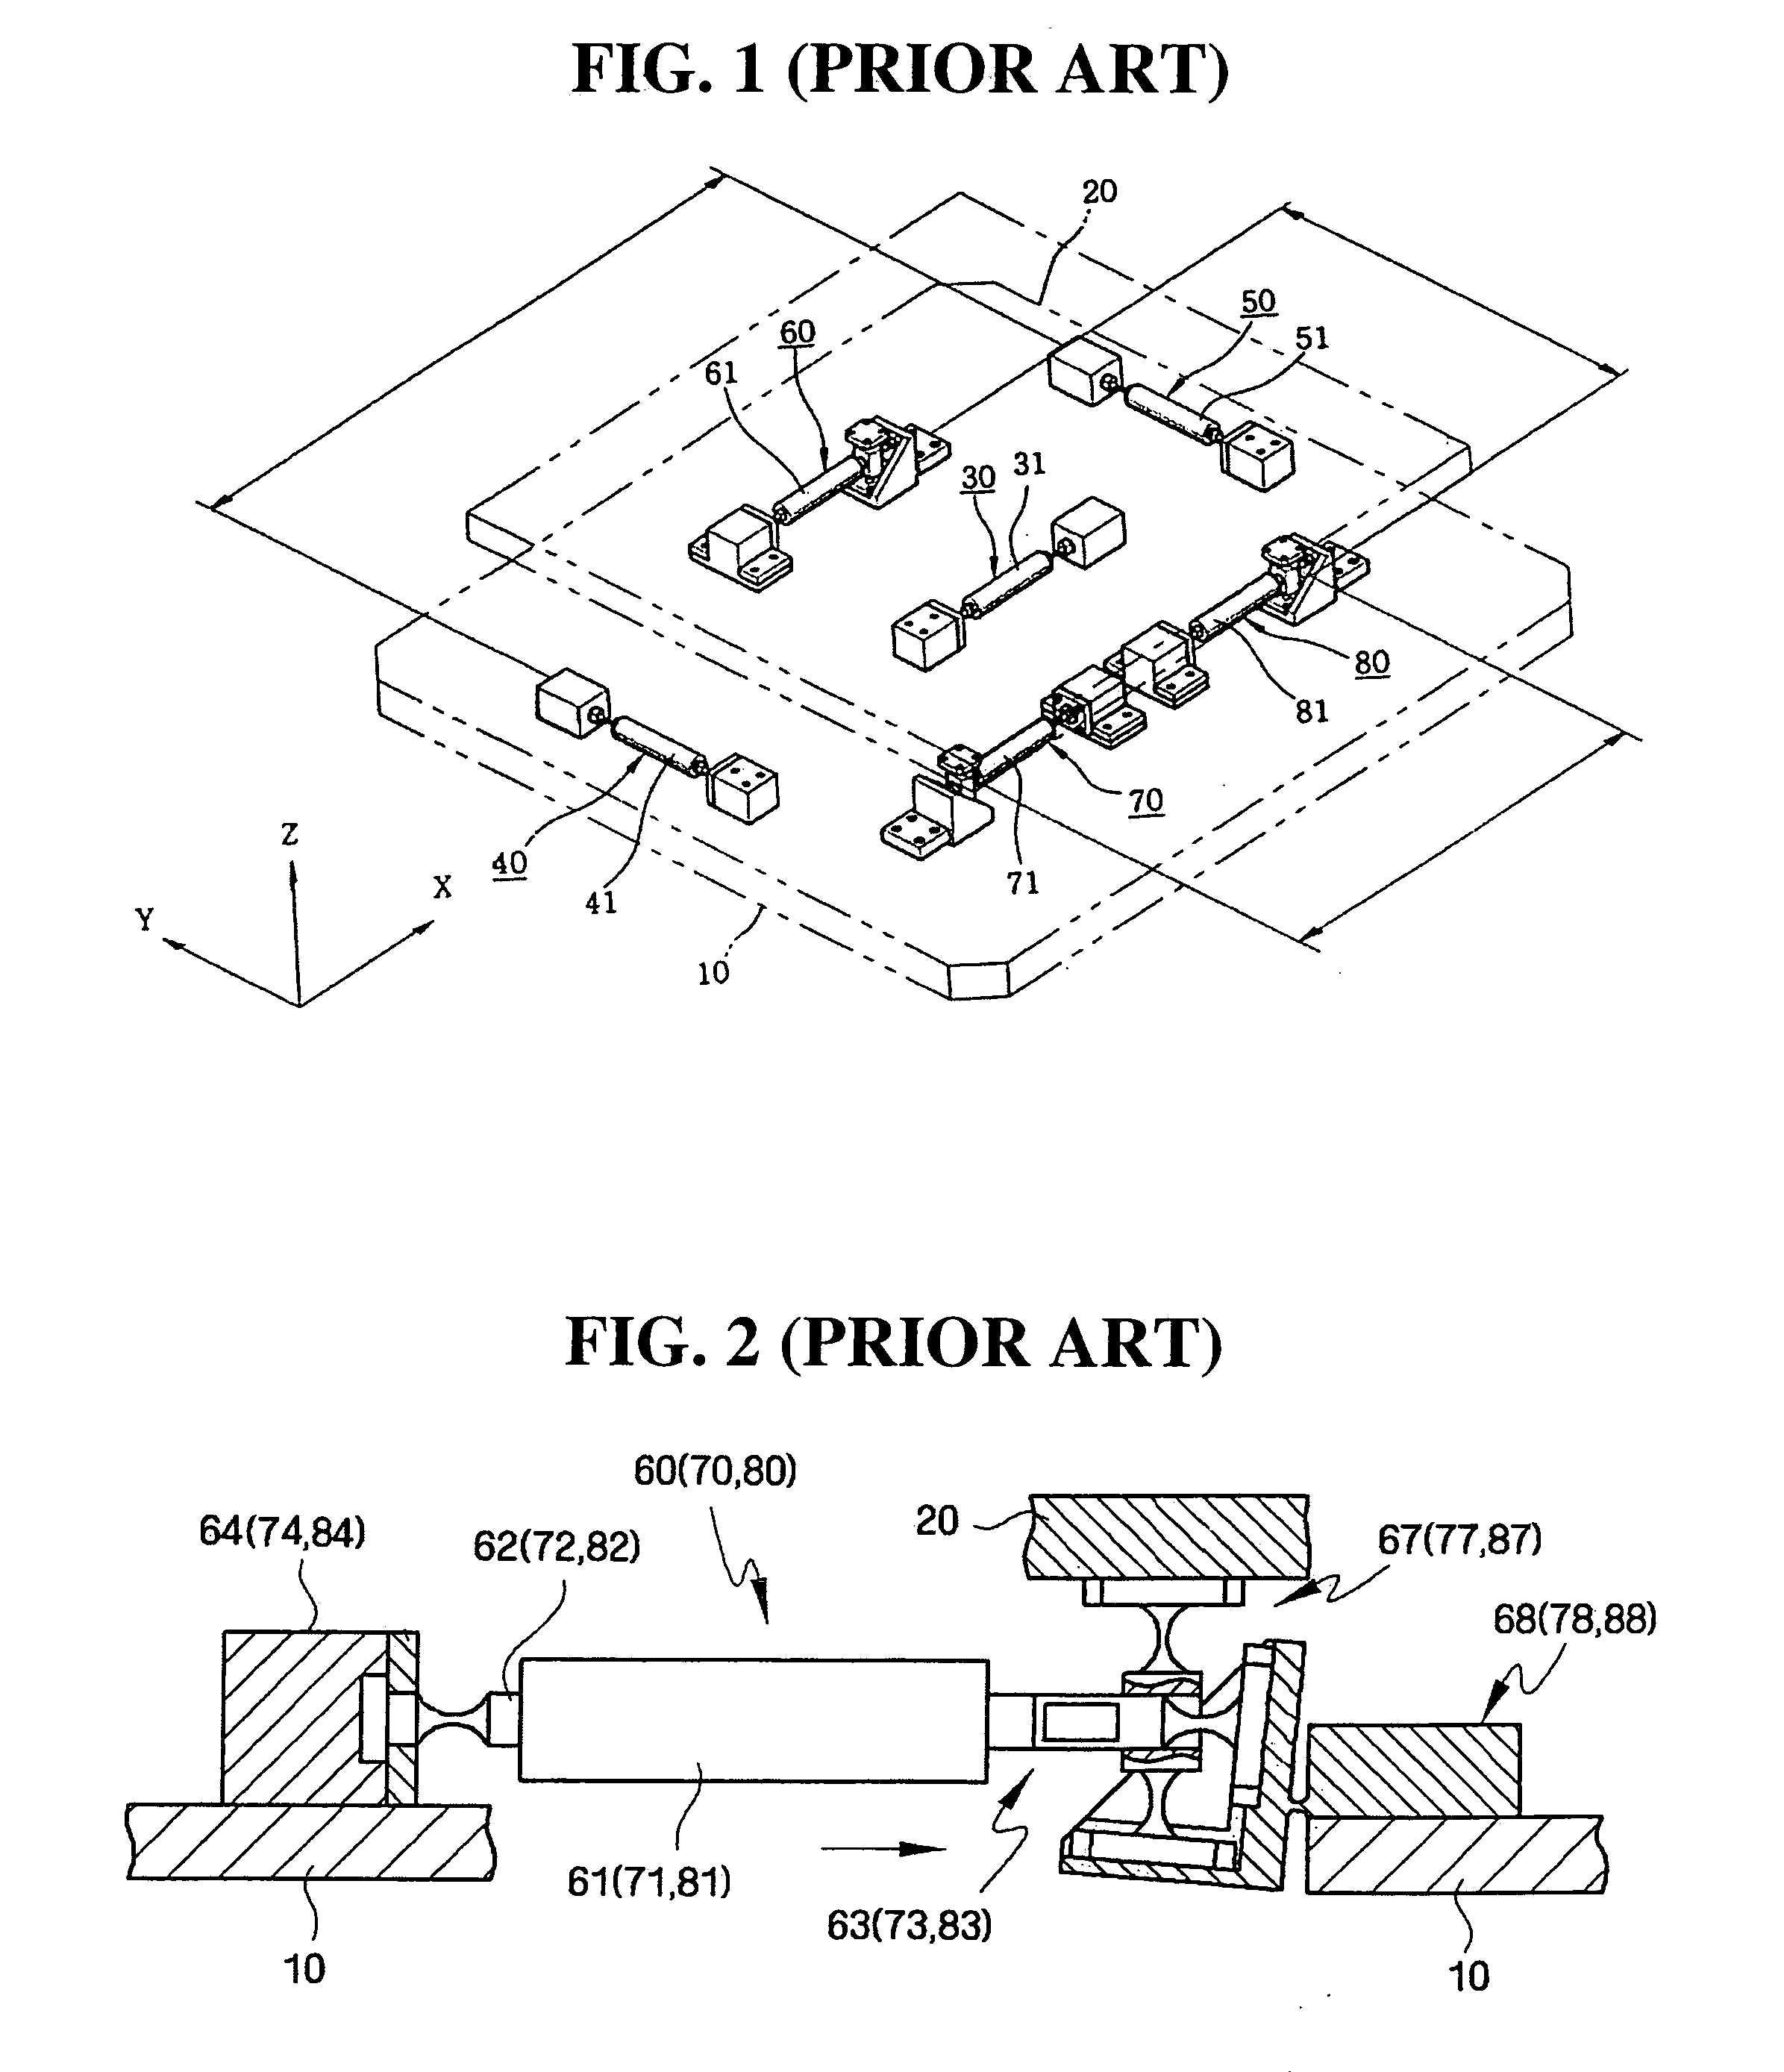 Micro position-control system